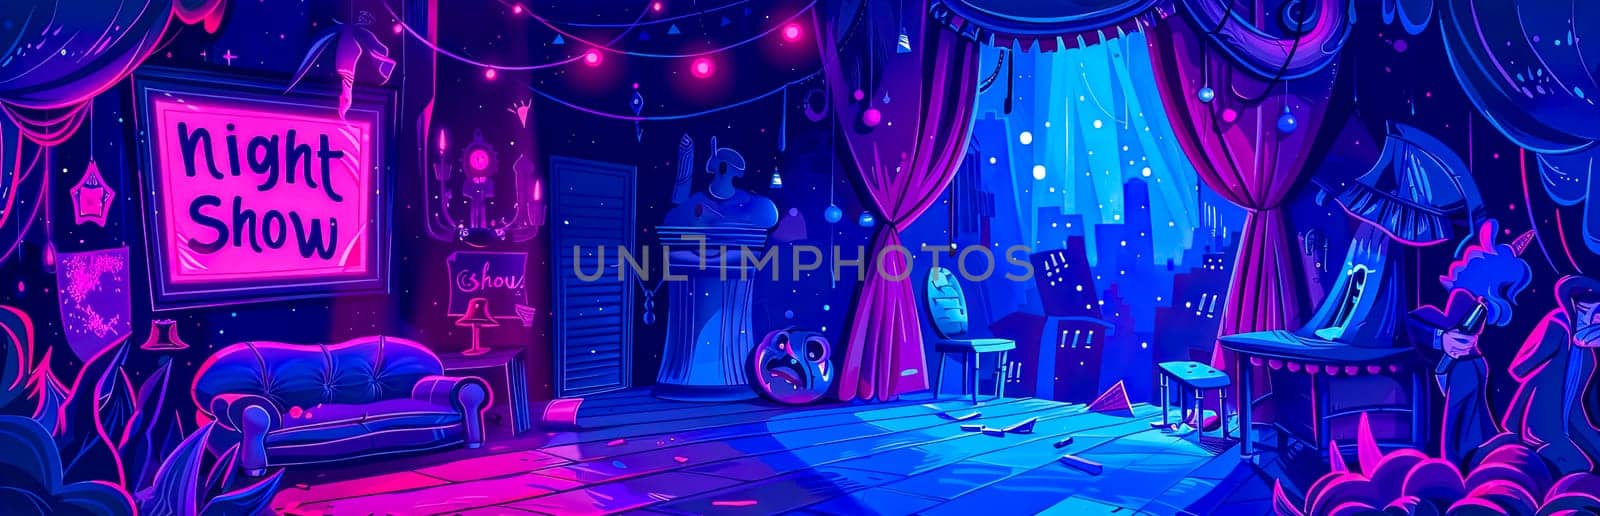 Neon-lit, colorful illustration of a night show stage with empty host chair and lively ambiance